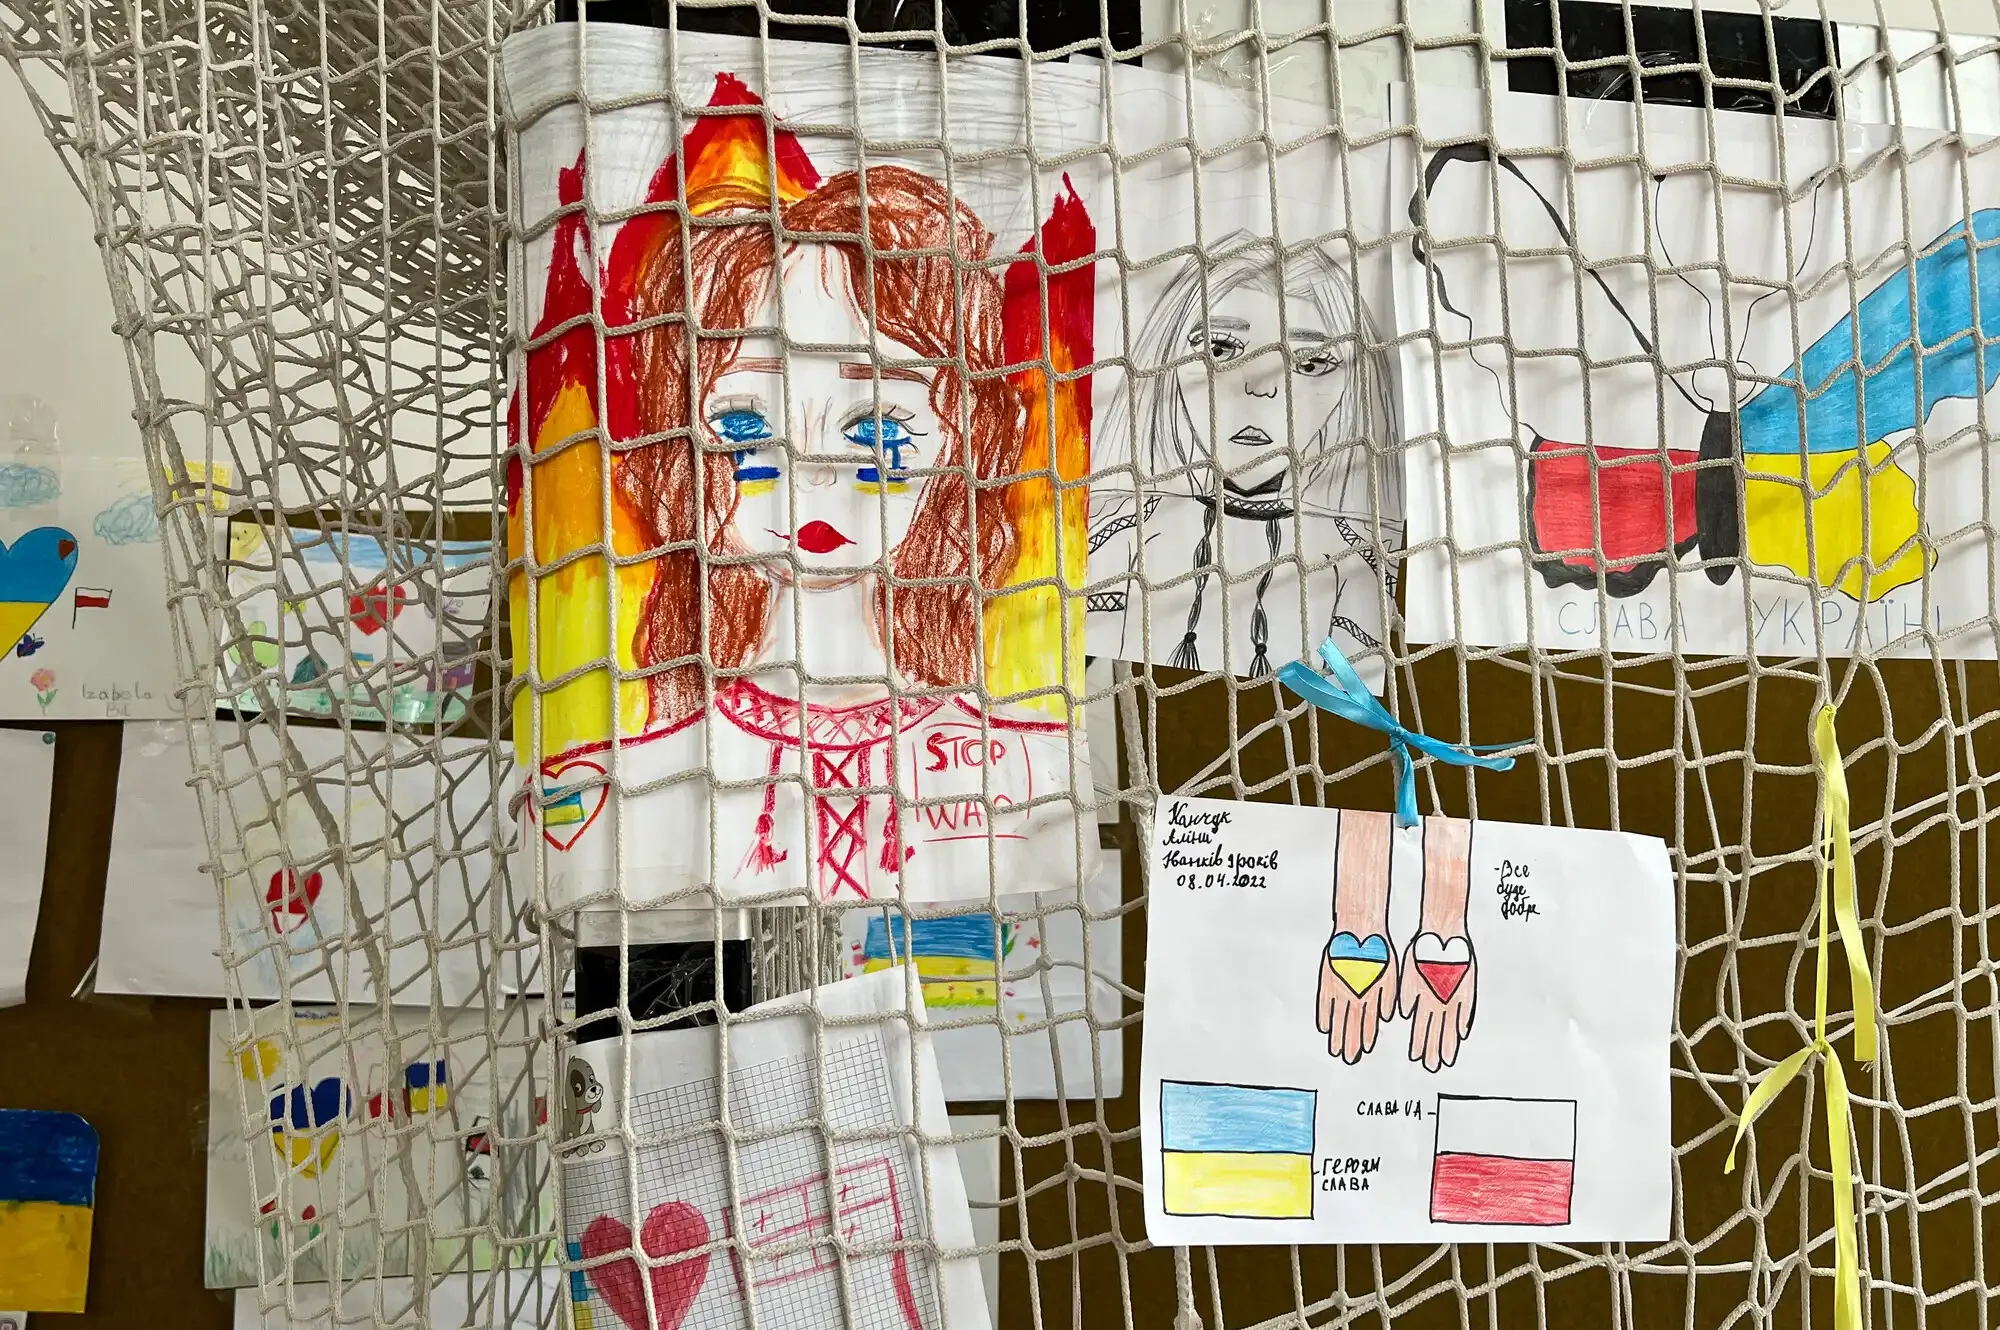 Some of the many drawings by Ukrainian refugee children that were informally displayed at an arts and crafts station in a converted school gym, Hala Sportowa, Lubycza Królewska.